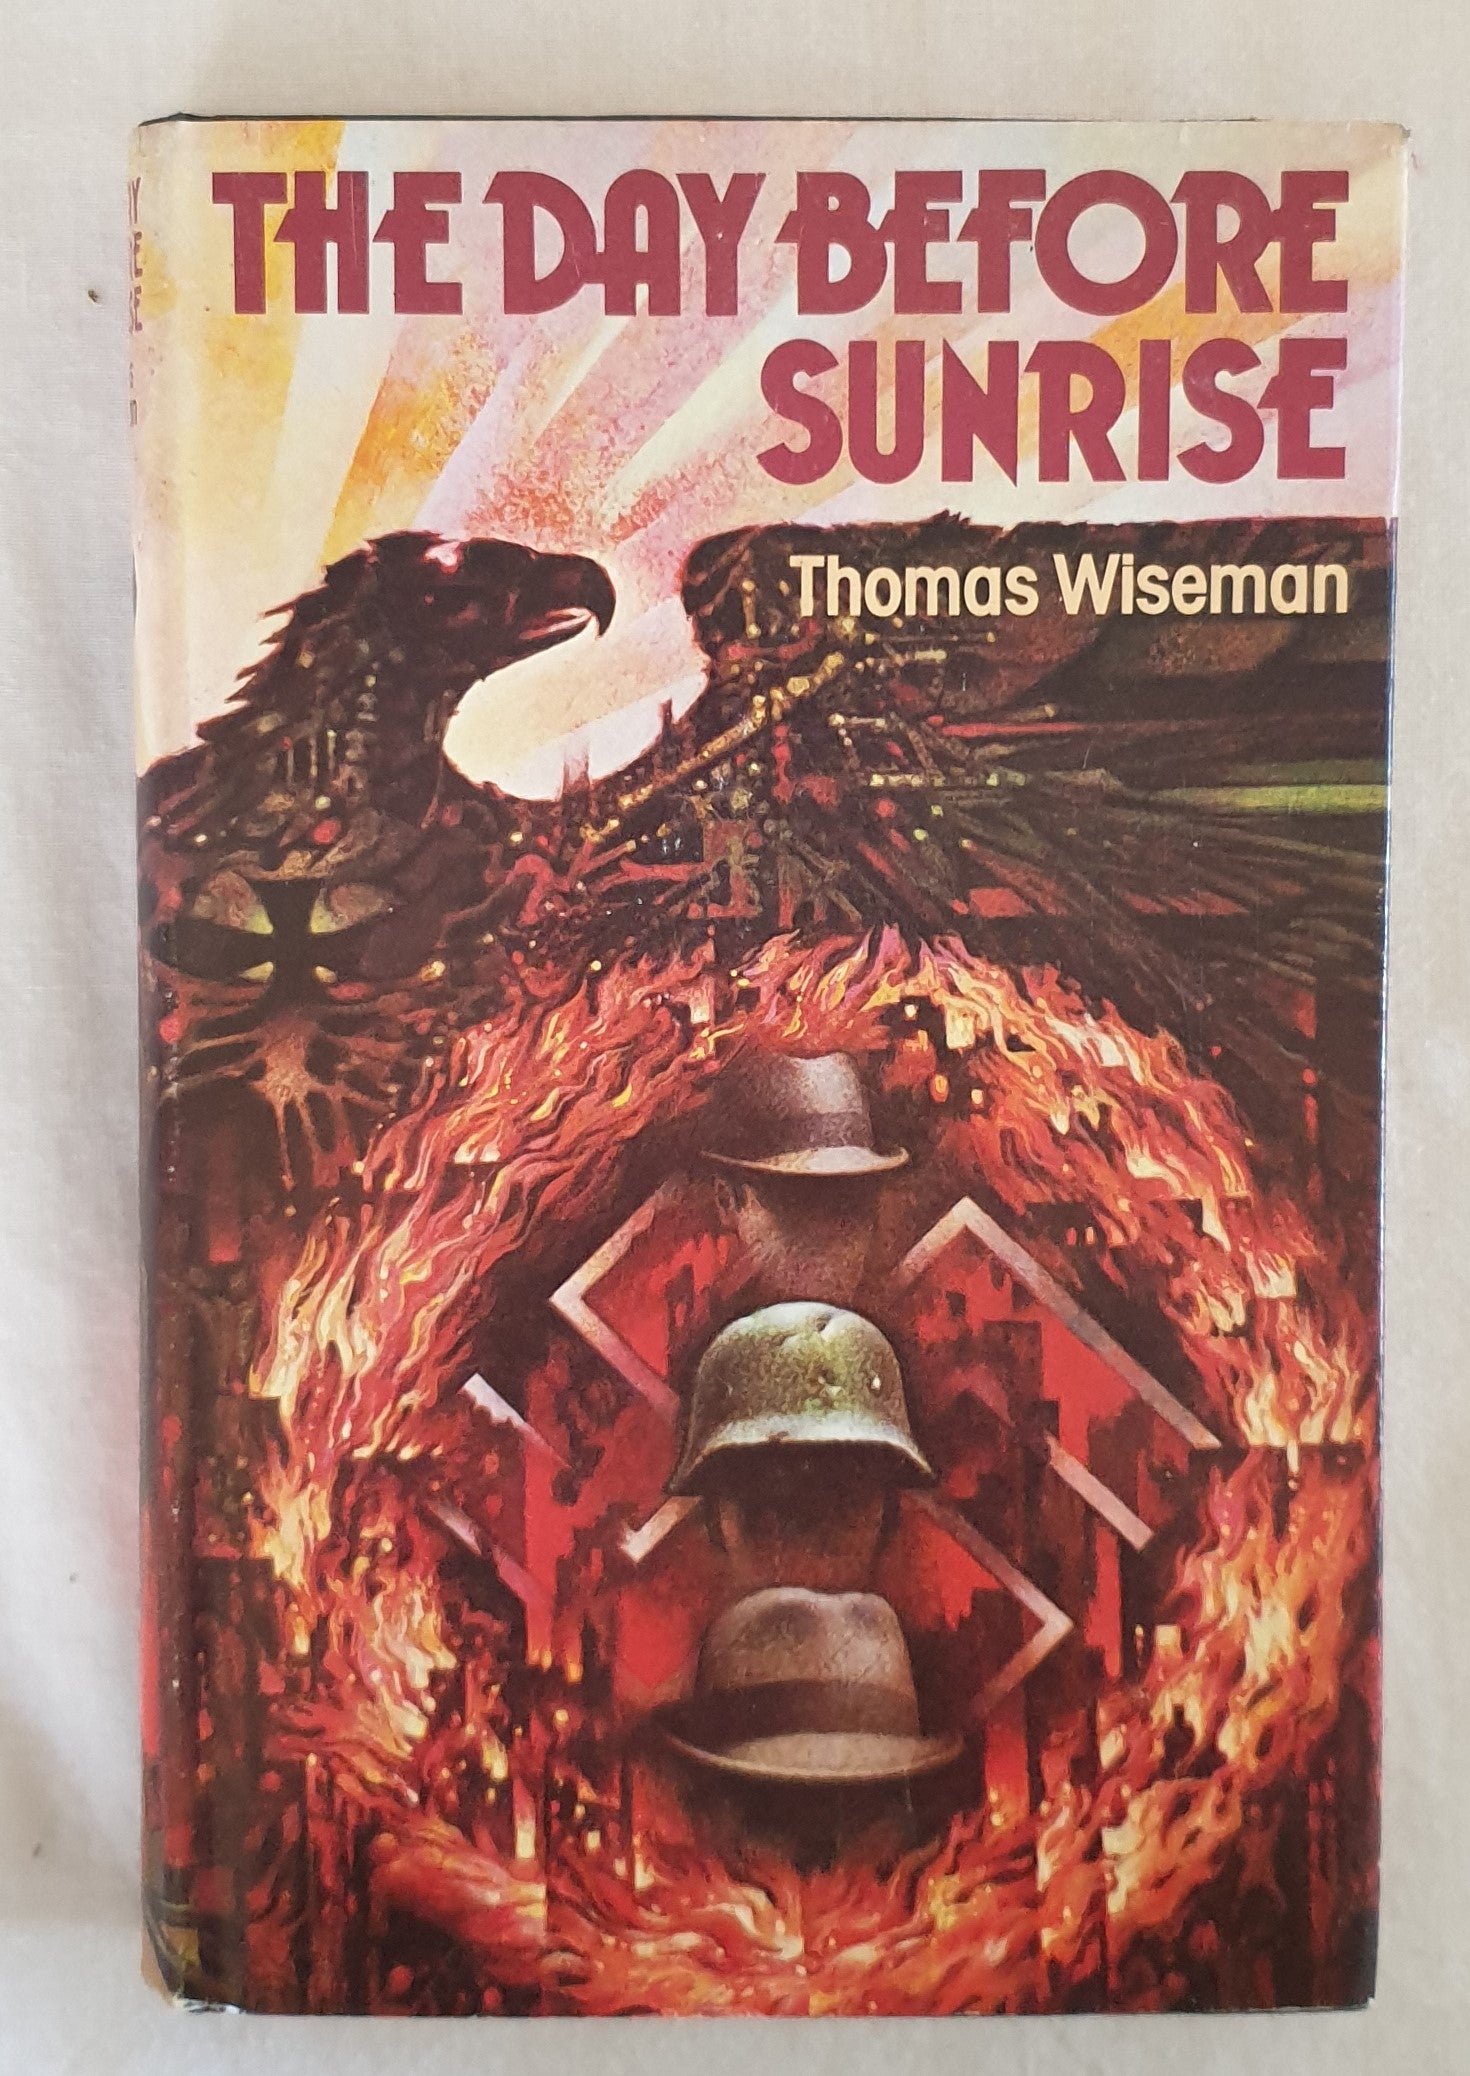 The Day Before Sunrise by Thomas Wiseman